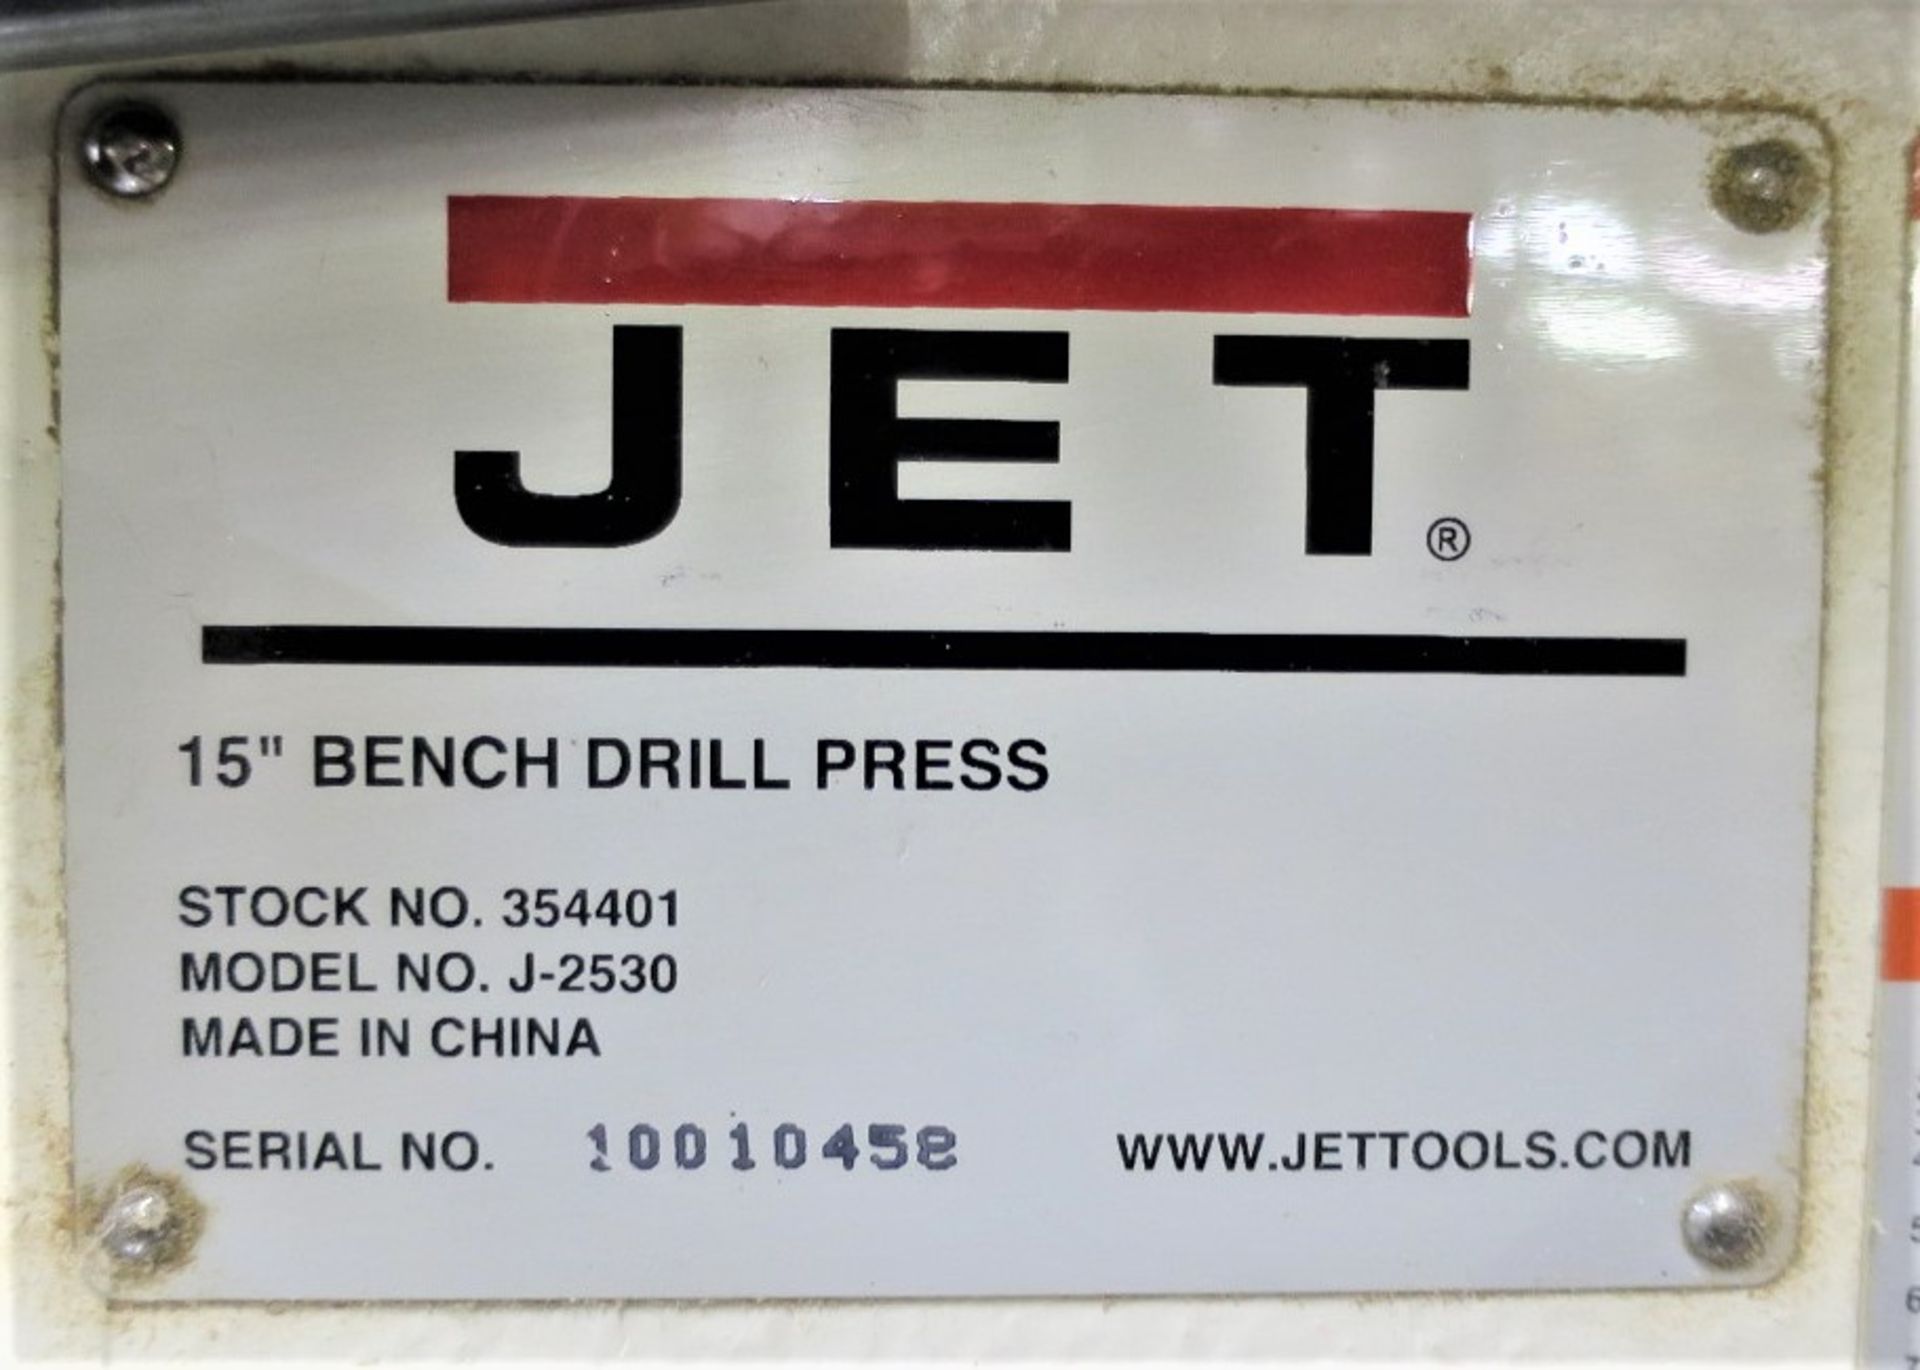 Jet 15" Bench Drill Press - Image 2 of 2